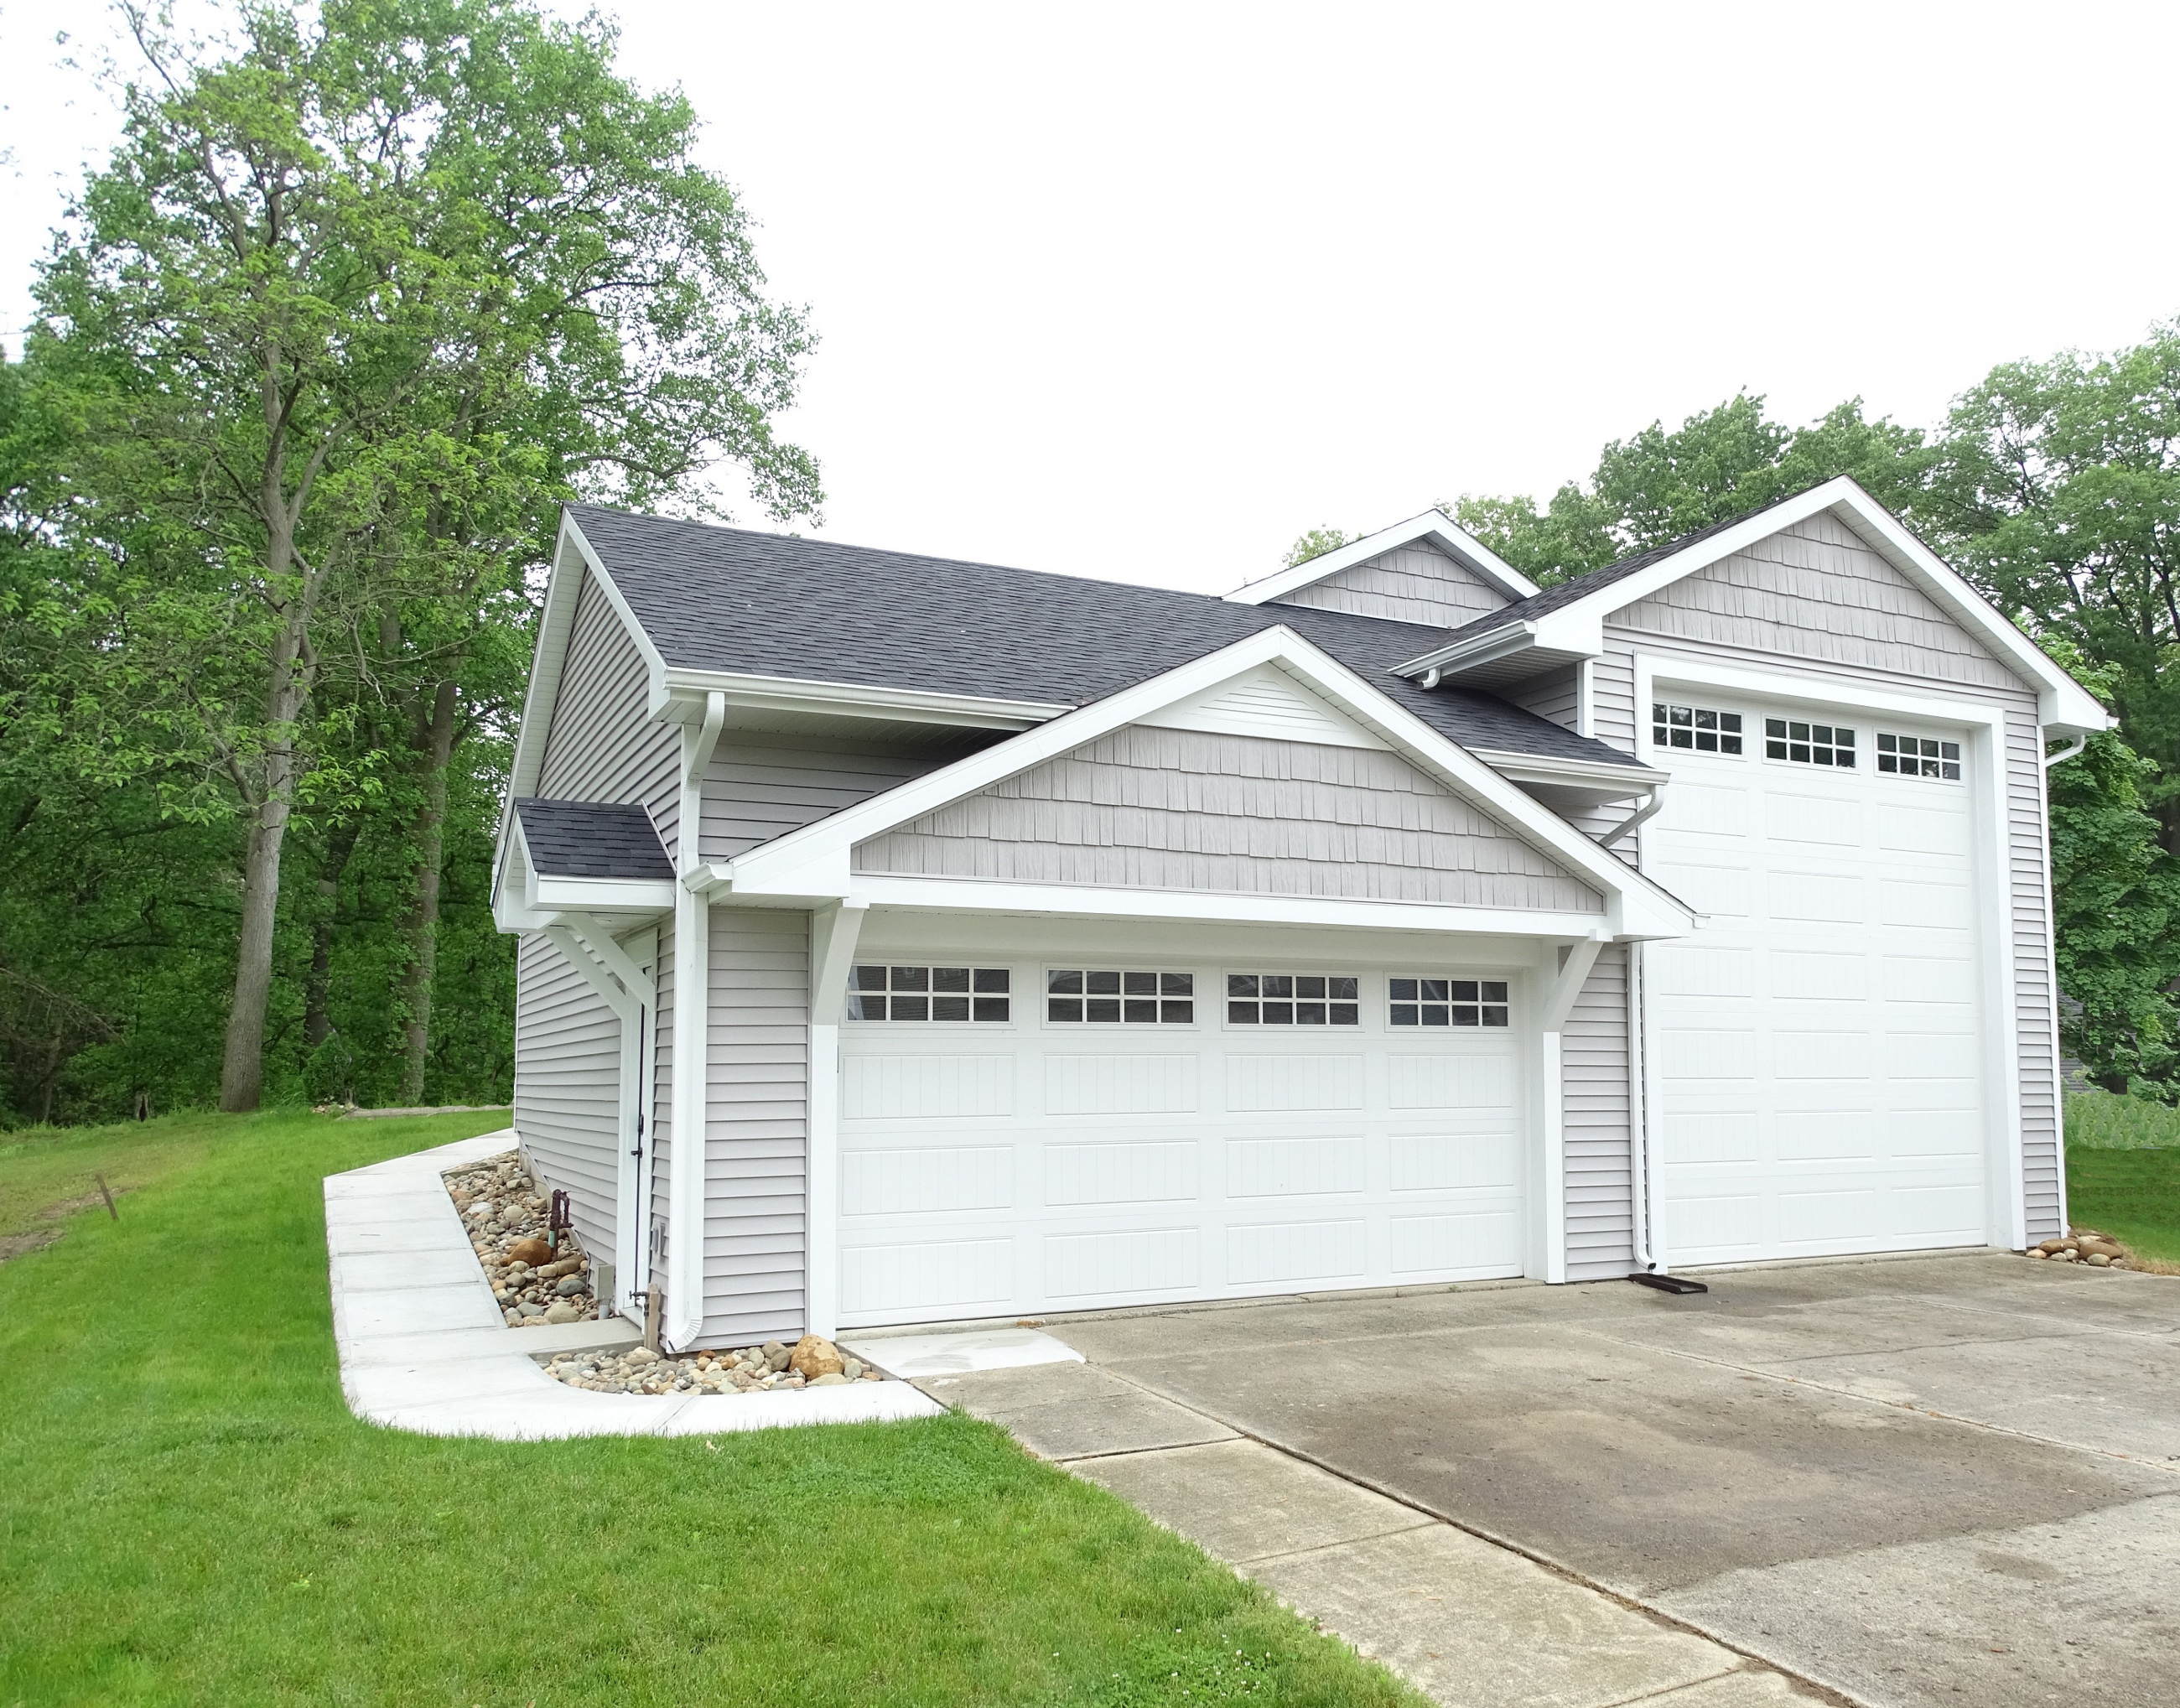 Front of new garage in northern Indiana